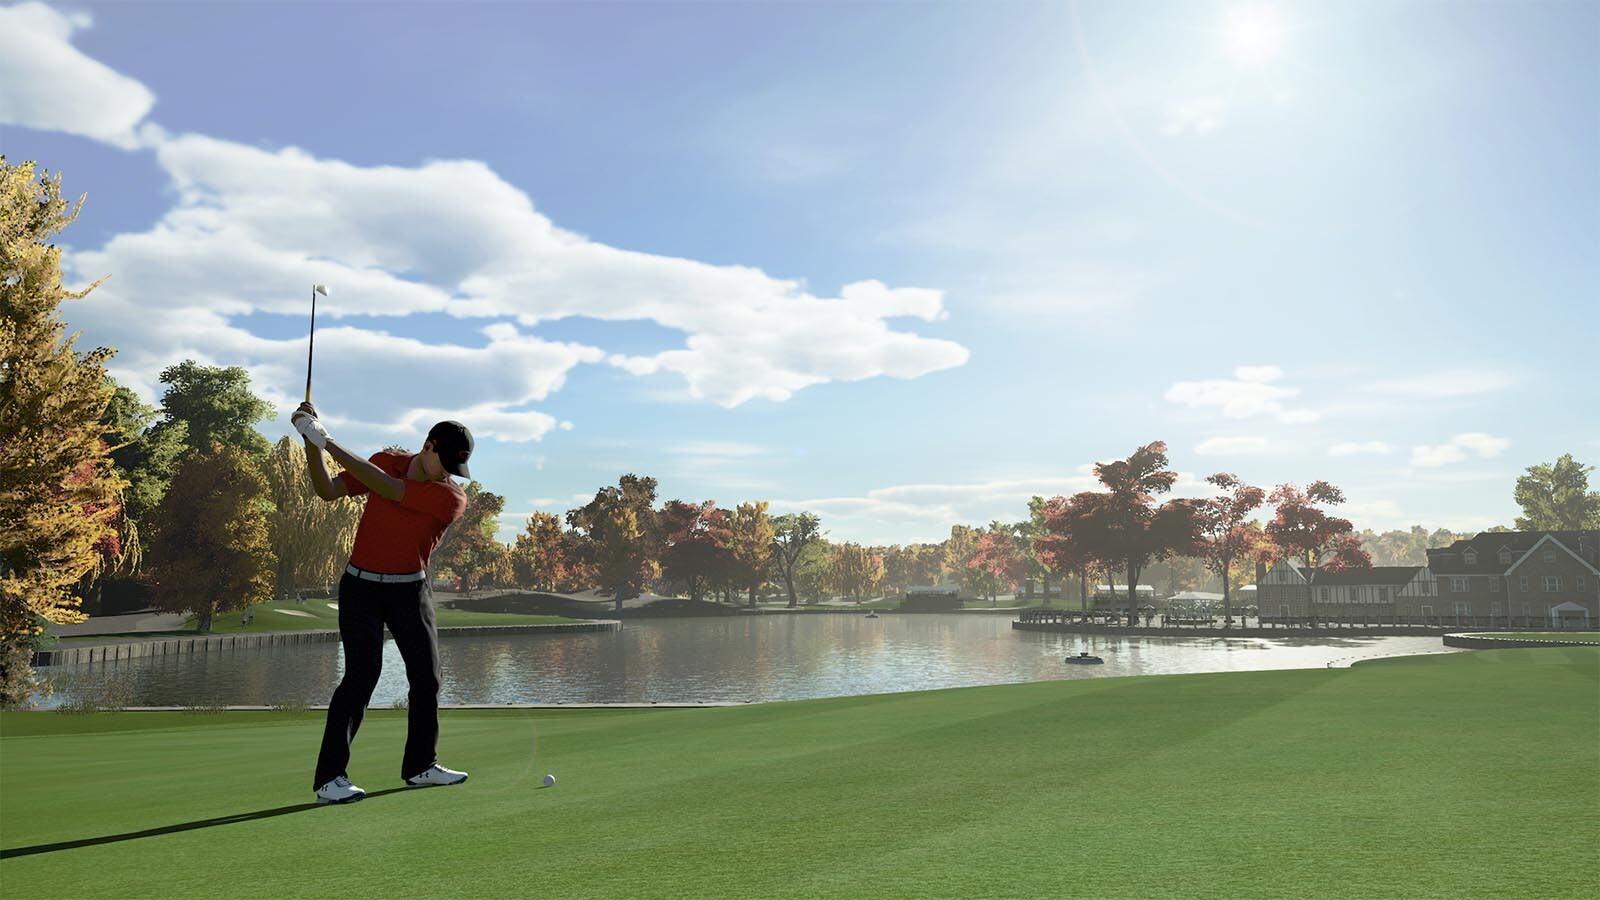 PGA TOUR 2K21 Digital Deluxe Edition Steam Key for PC Buy now